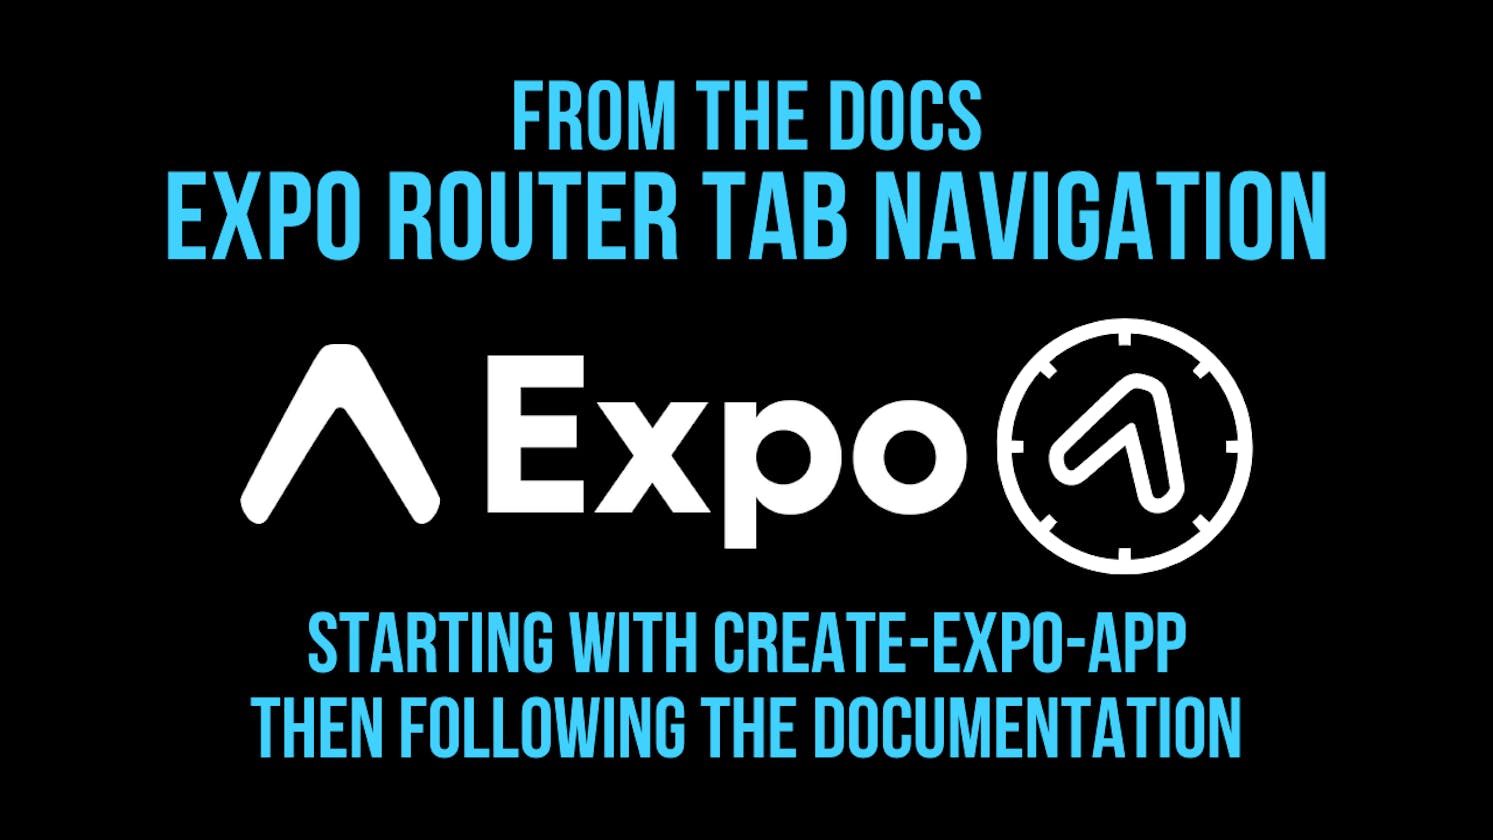 Expo Router Tab Navigation -From the Docs